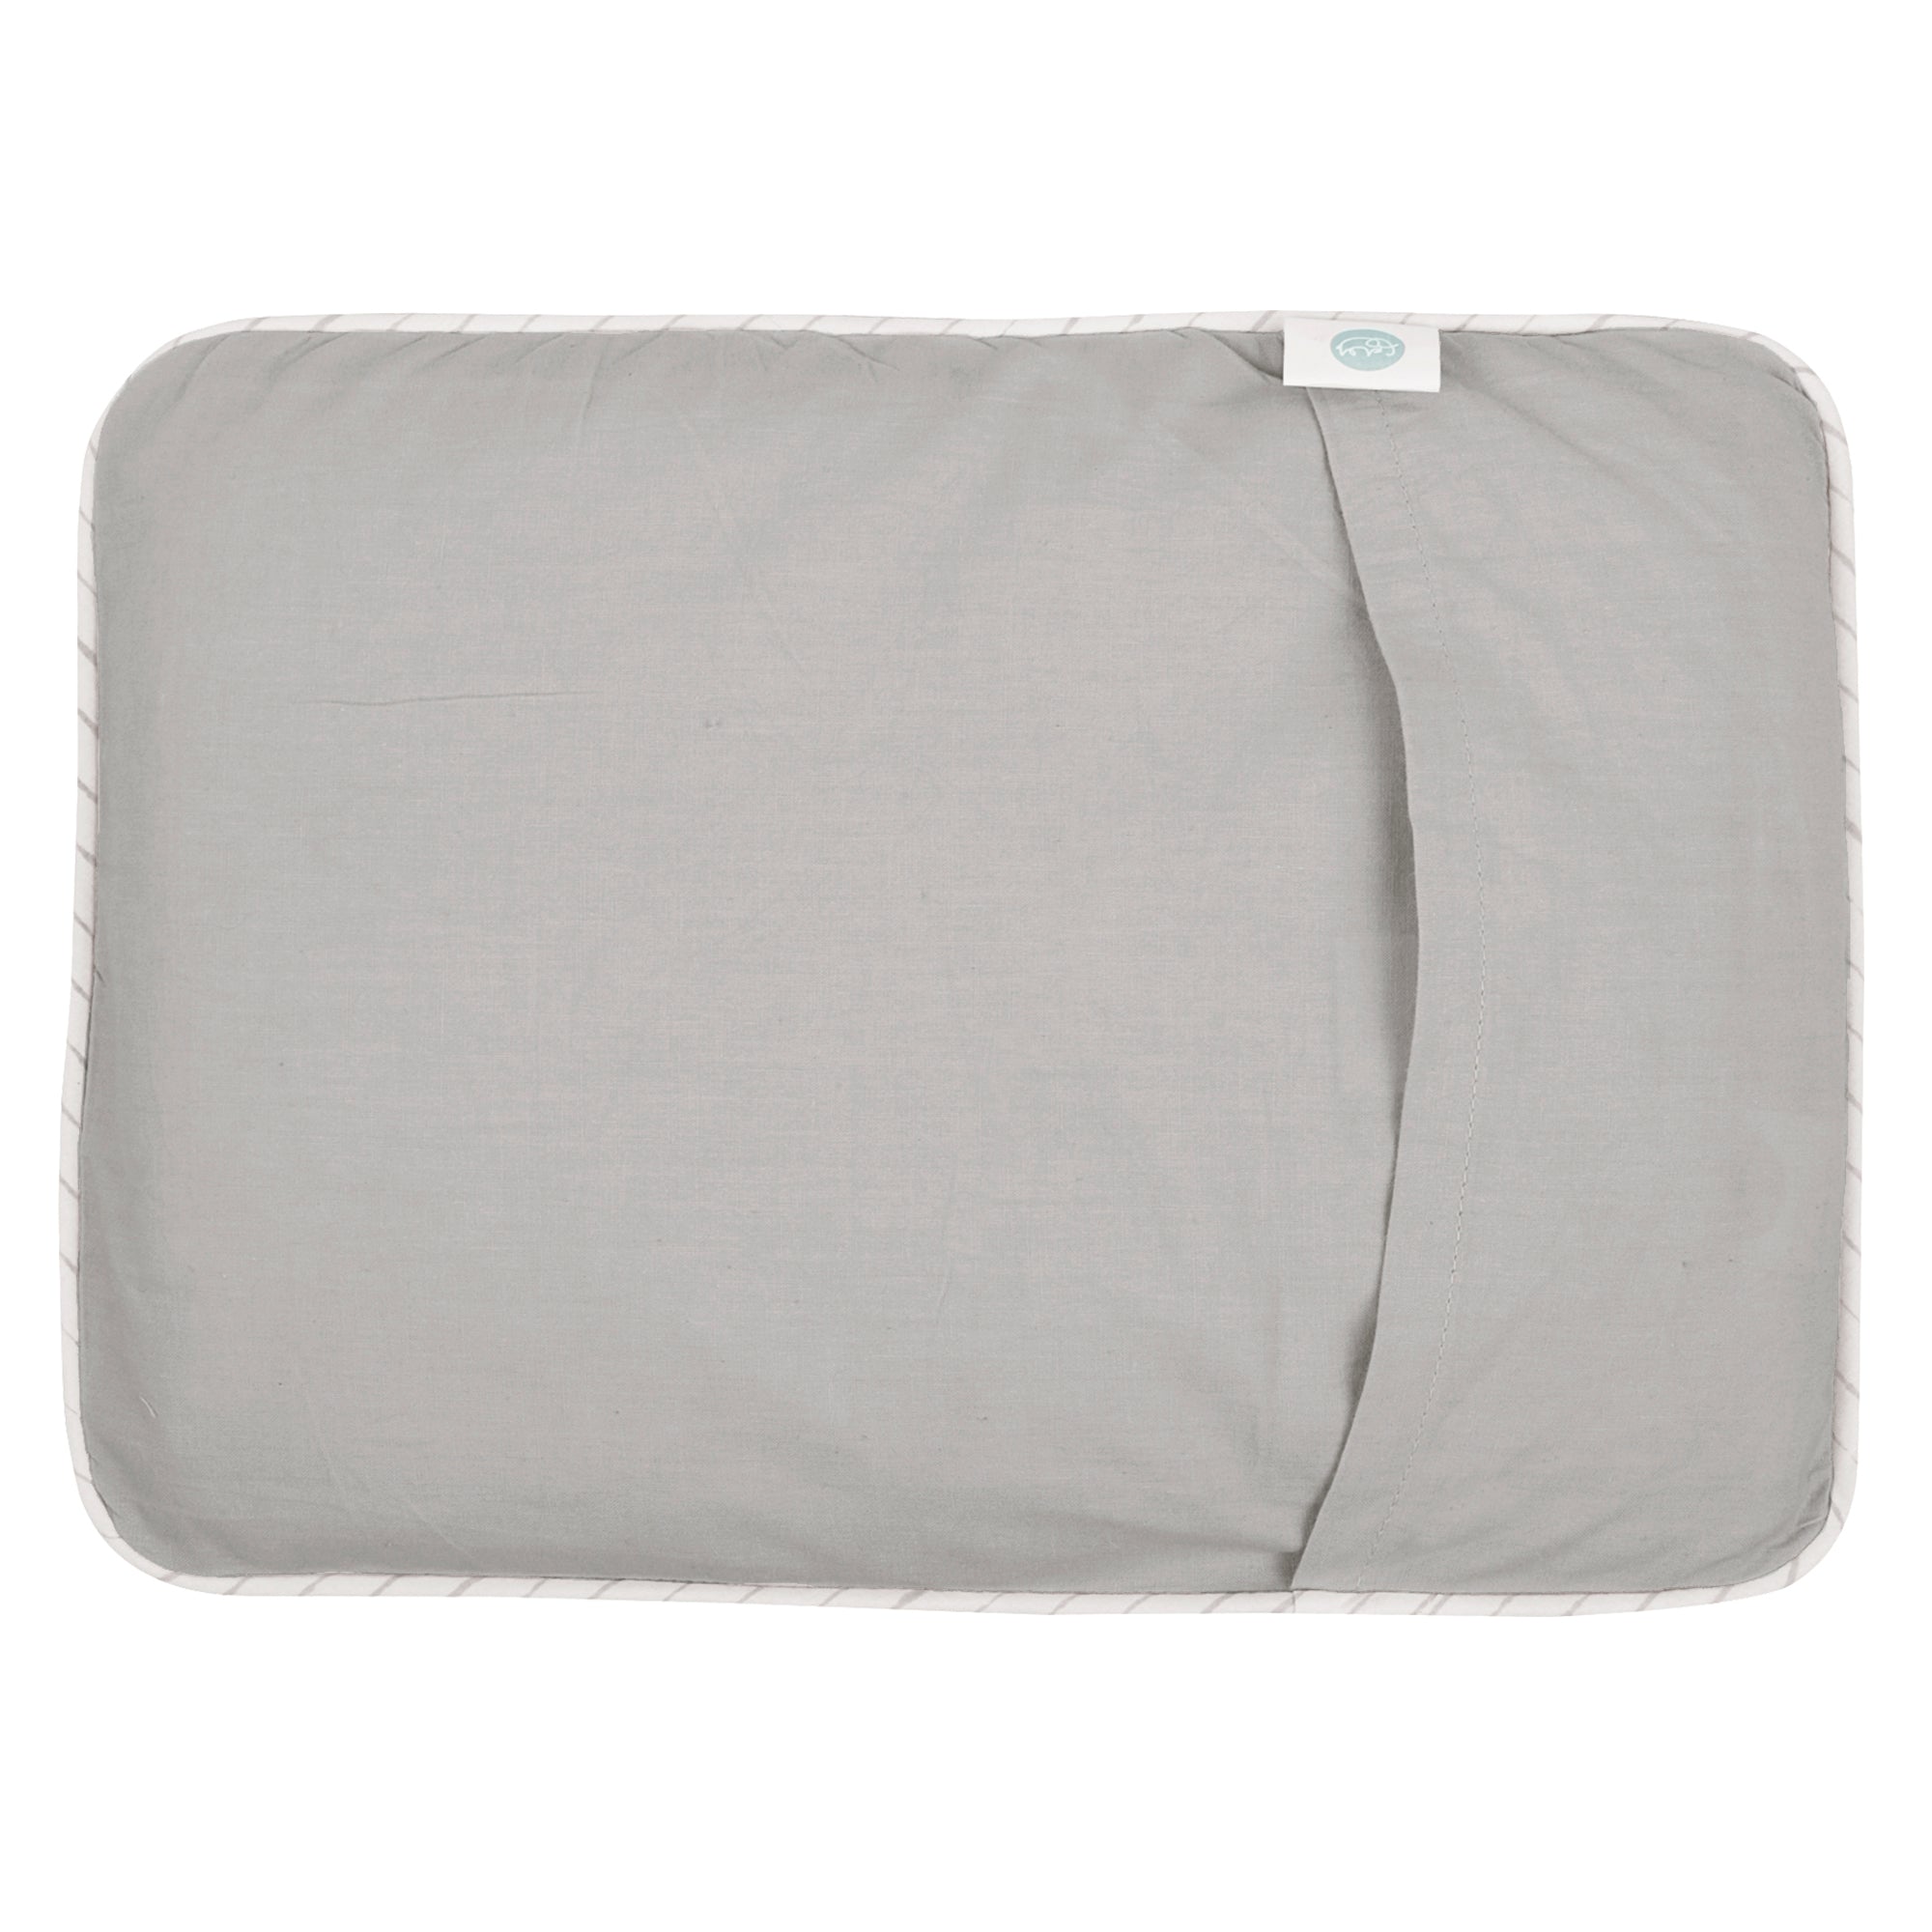 SMOKY GREY MUSTARD PILLOW COVER AND FILLER SETS